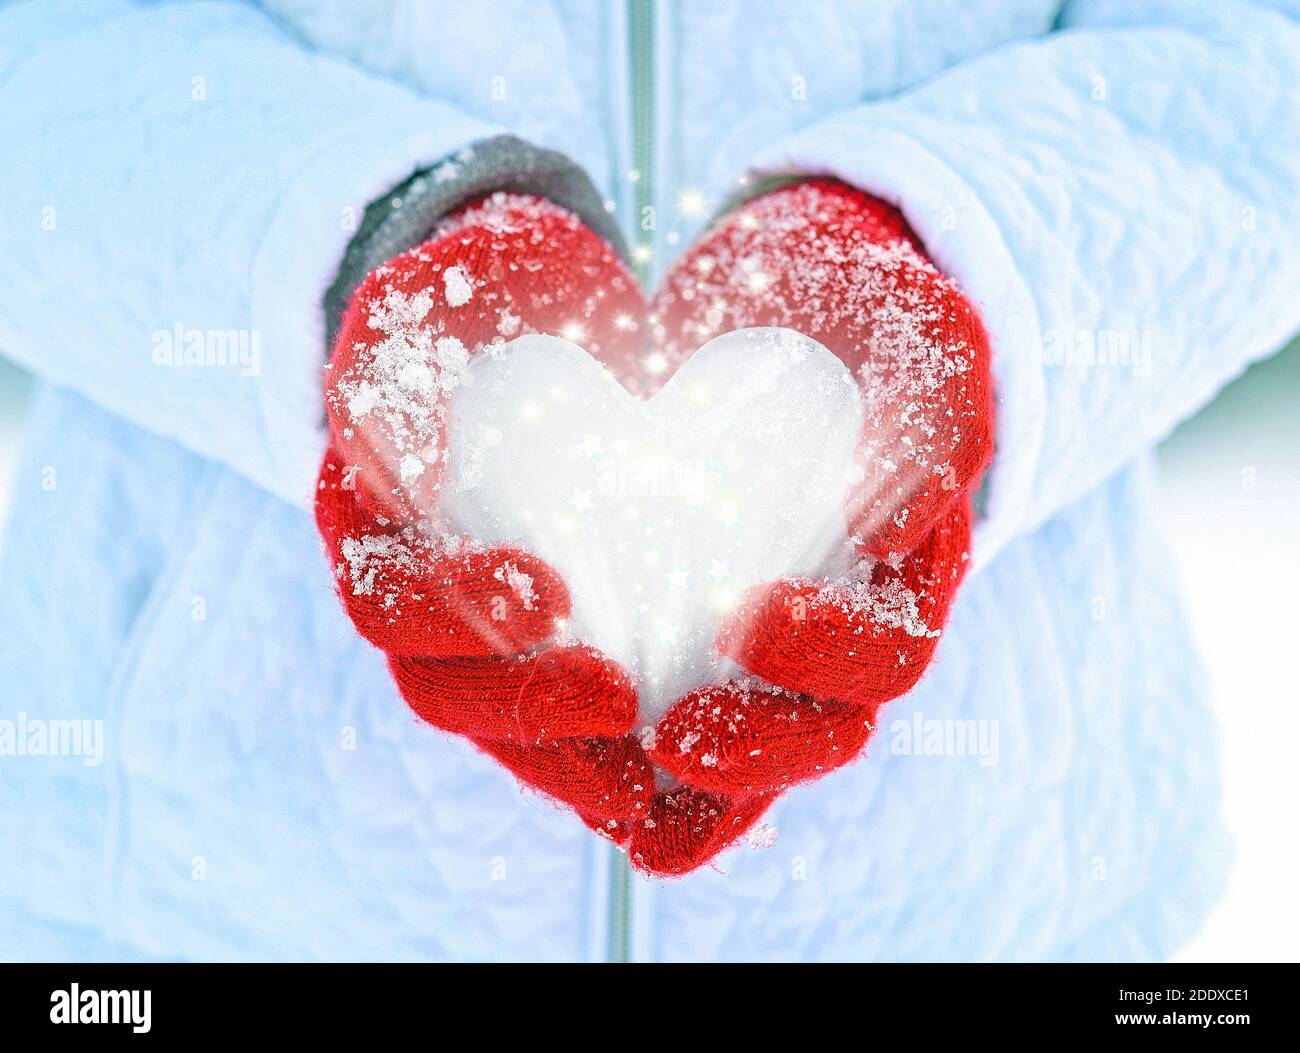 close up of red gloves holding ice heart with glowing sparkles and stars Stock Photo